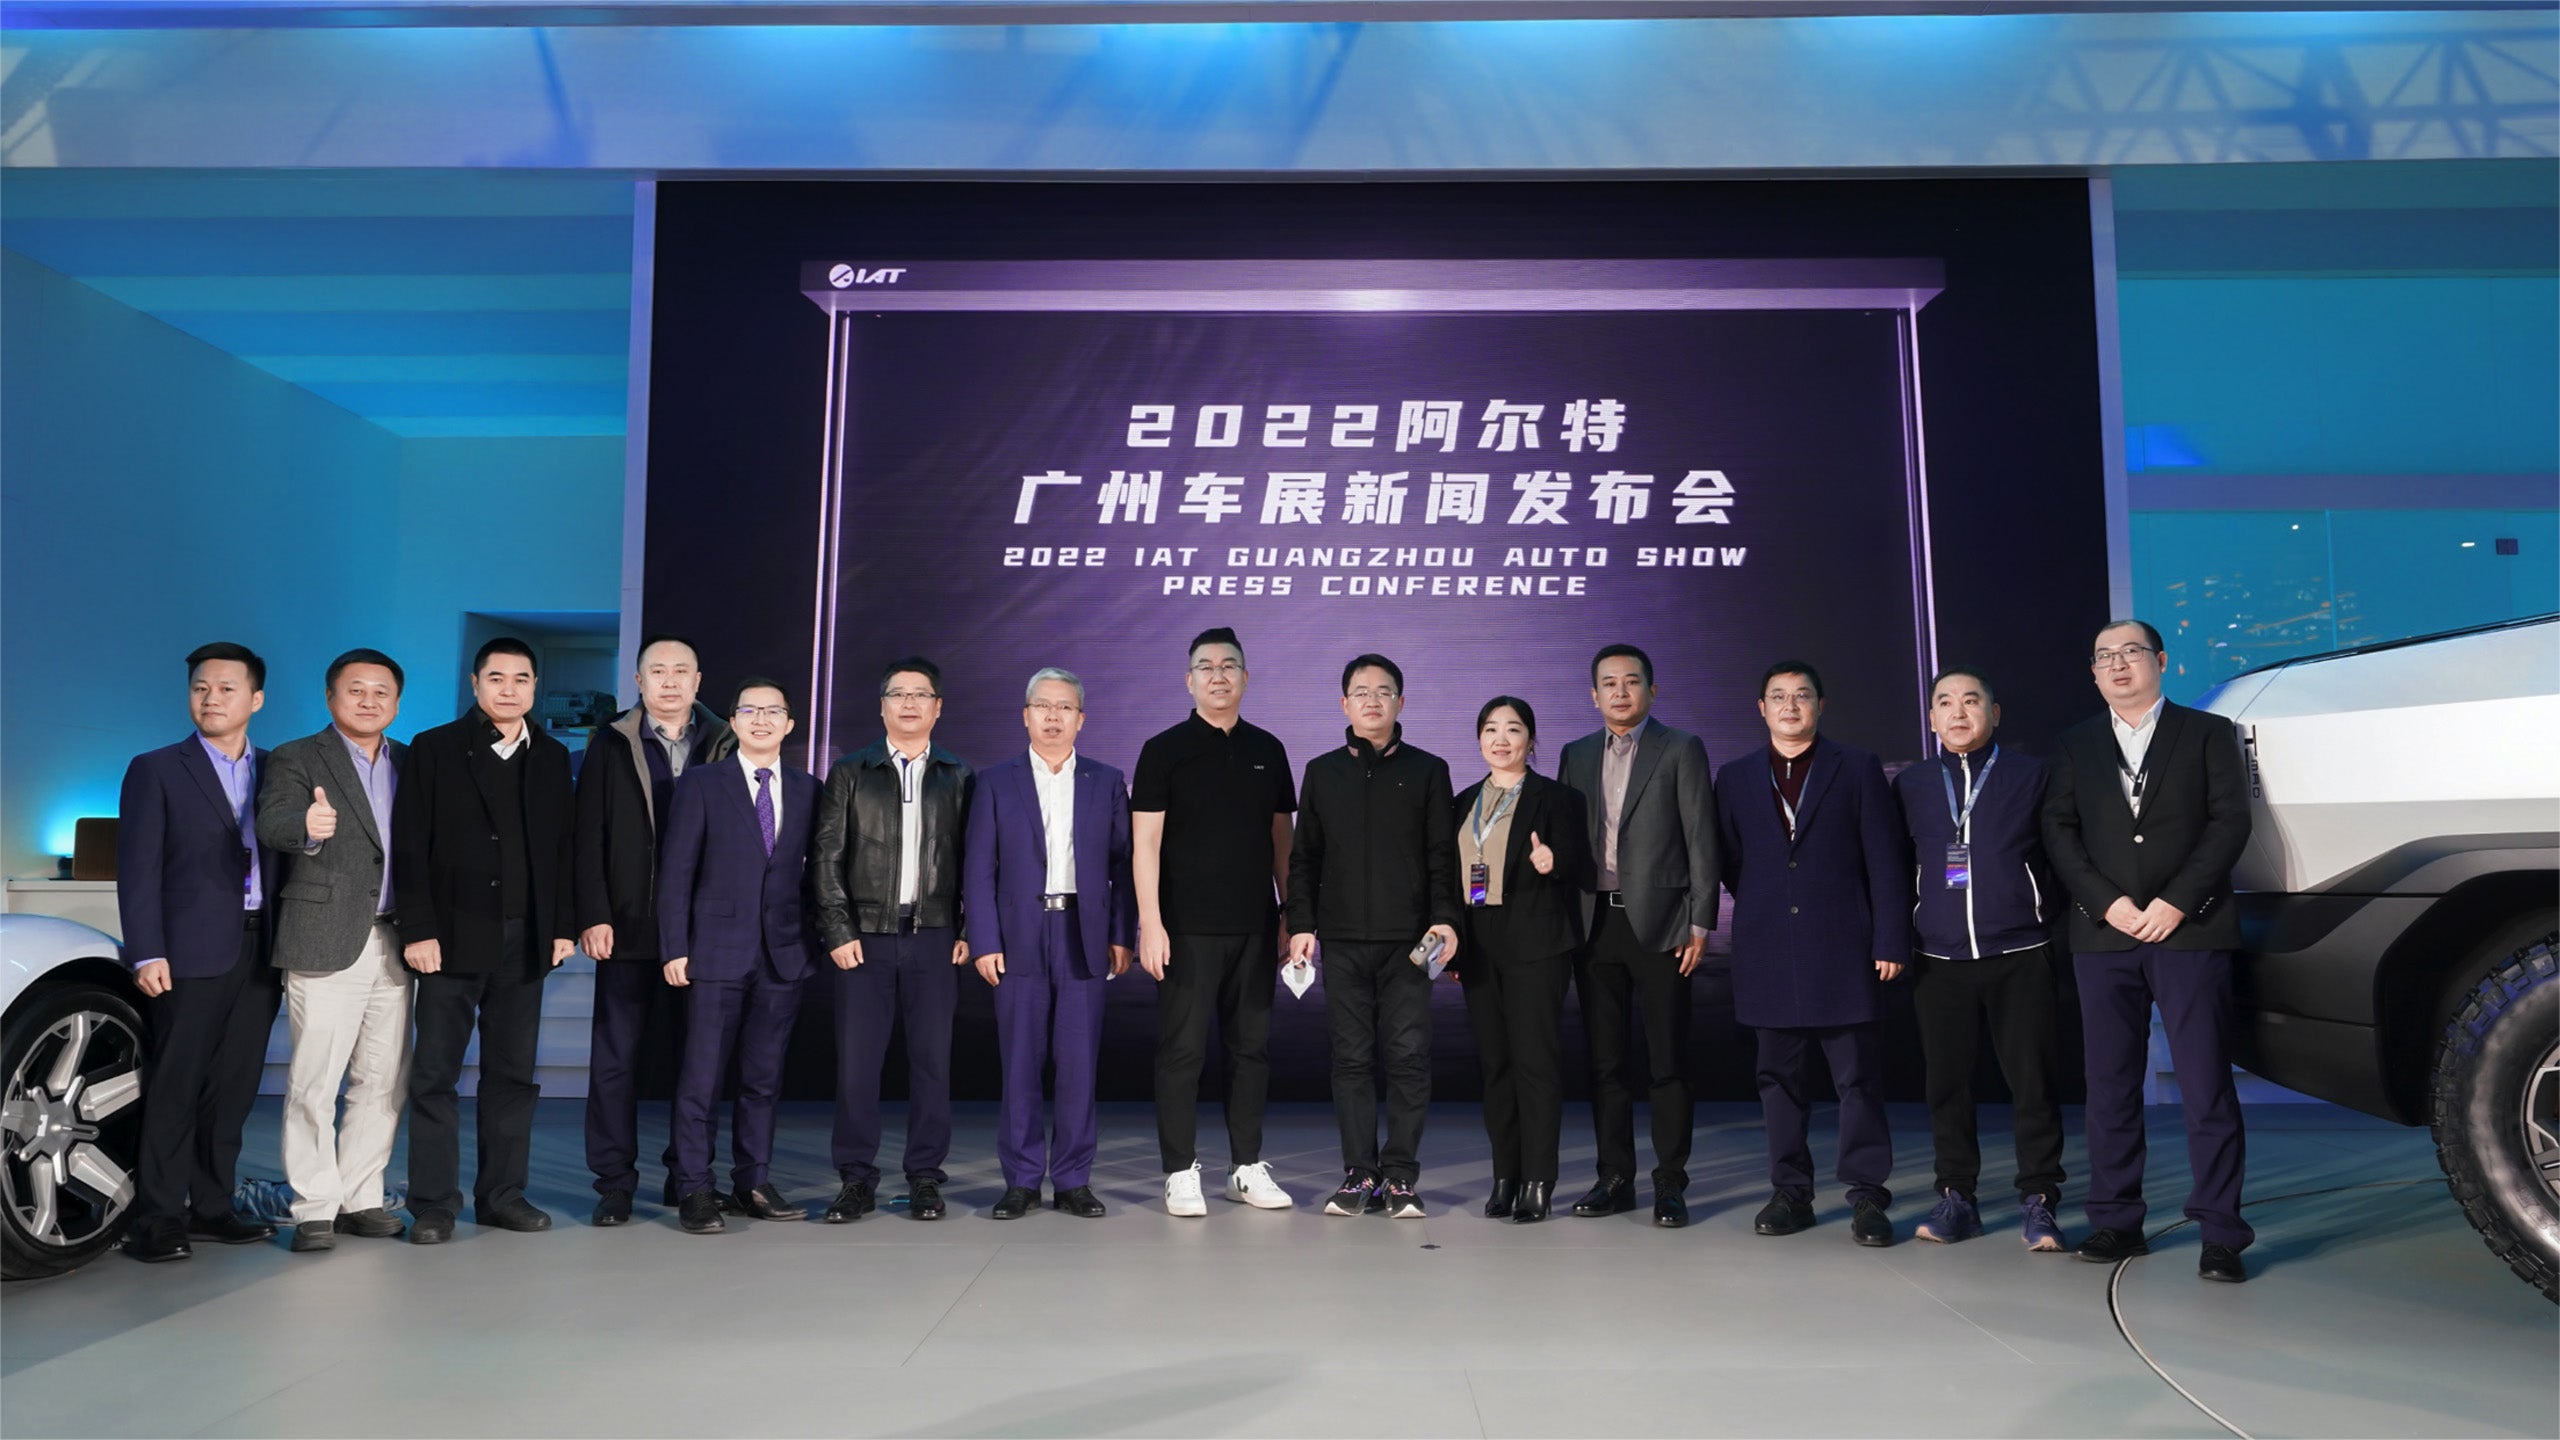 Gecko Technology and IAT Auto jointly build the Rubik's Cube platform to lead the transformation of the automotive industry